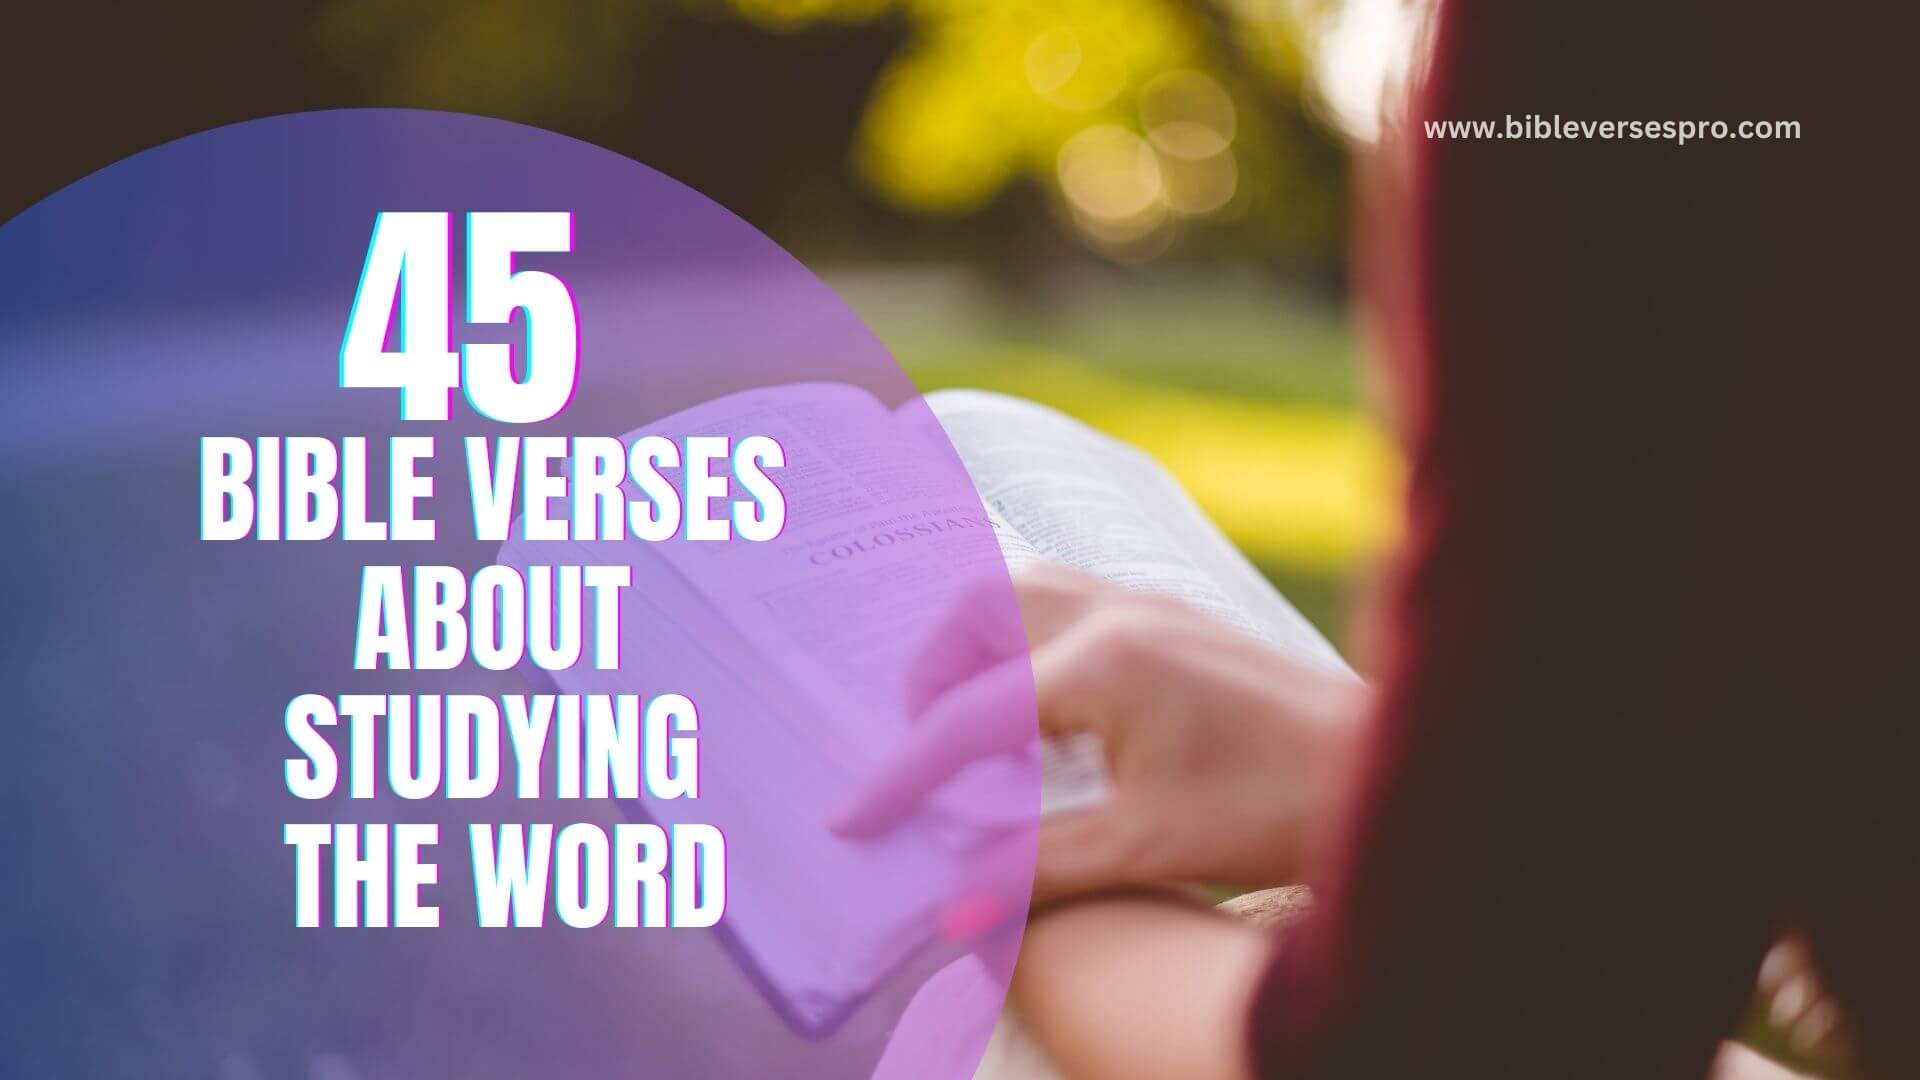 BIBLE VERSES ABOUT STUDYING THE WORD (1)